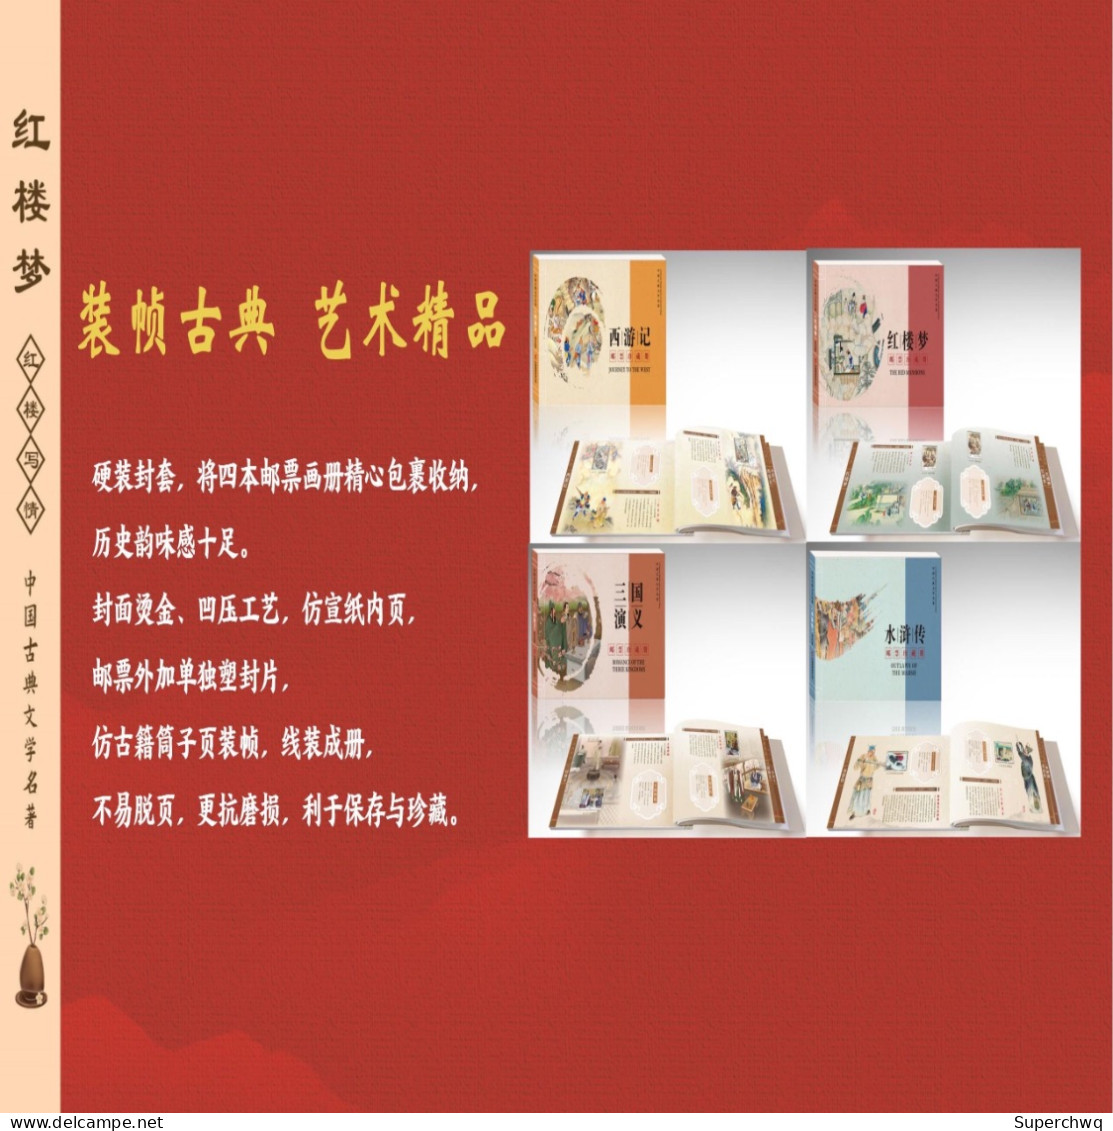 China Stamp Collection of "Four Great Classical Novels" Issued by China Philatelic Co., Ltd